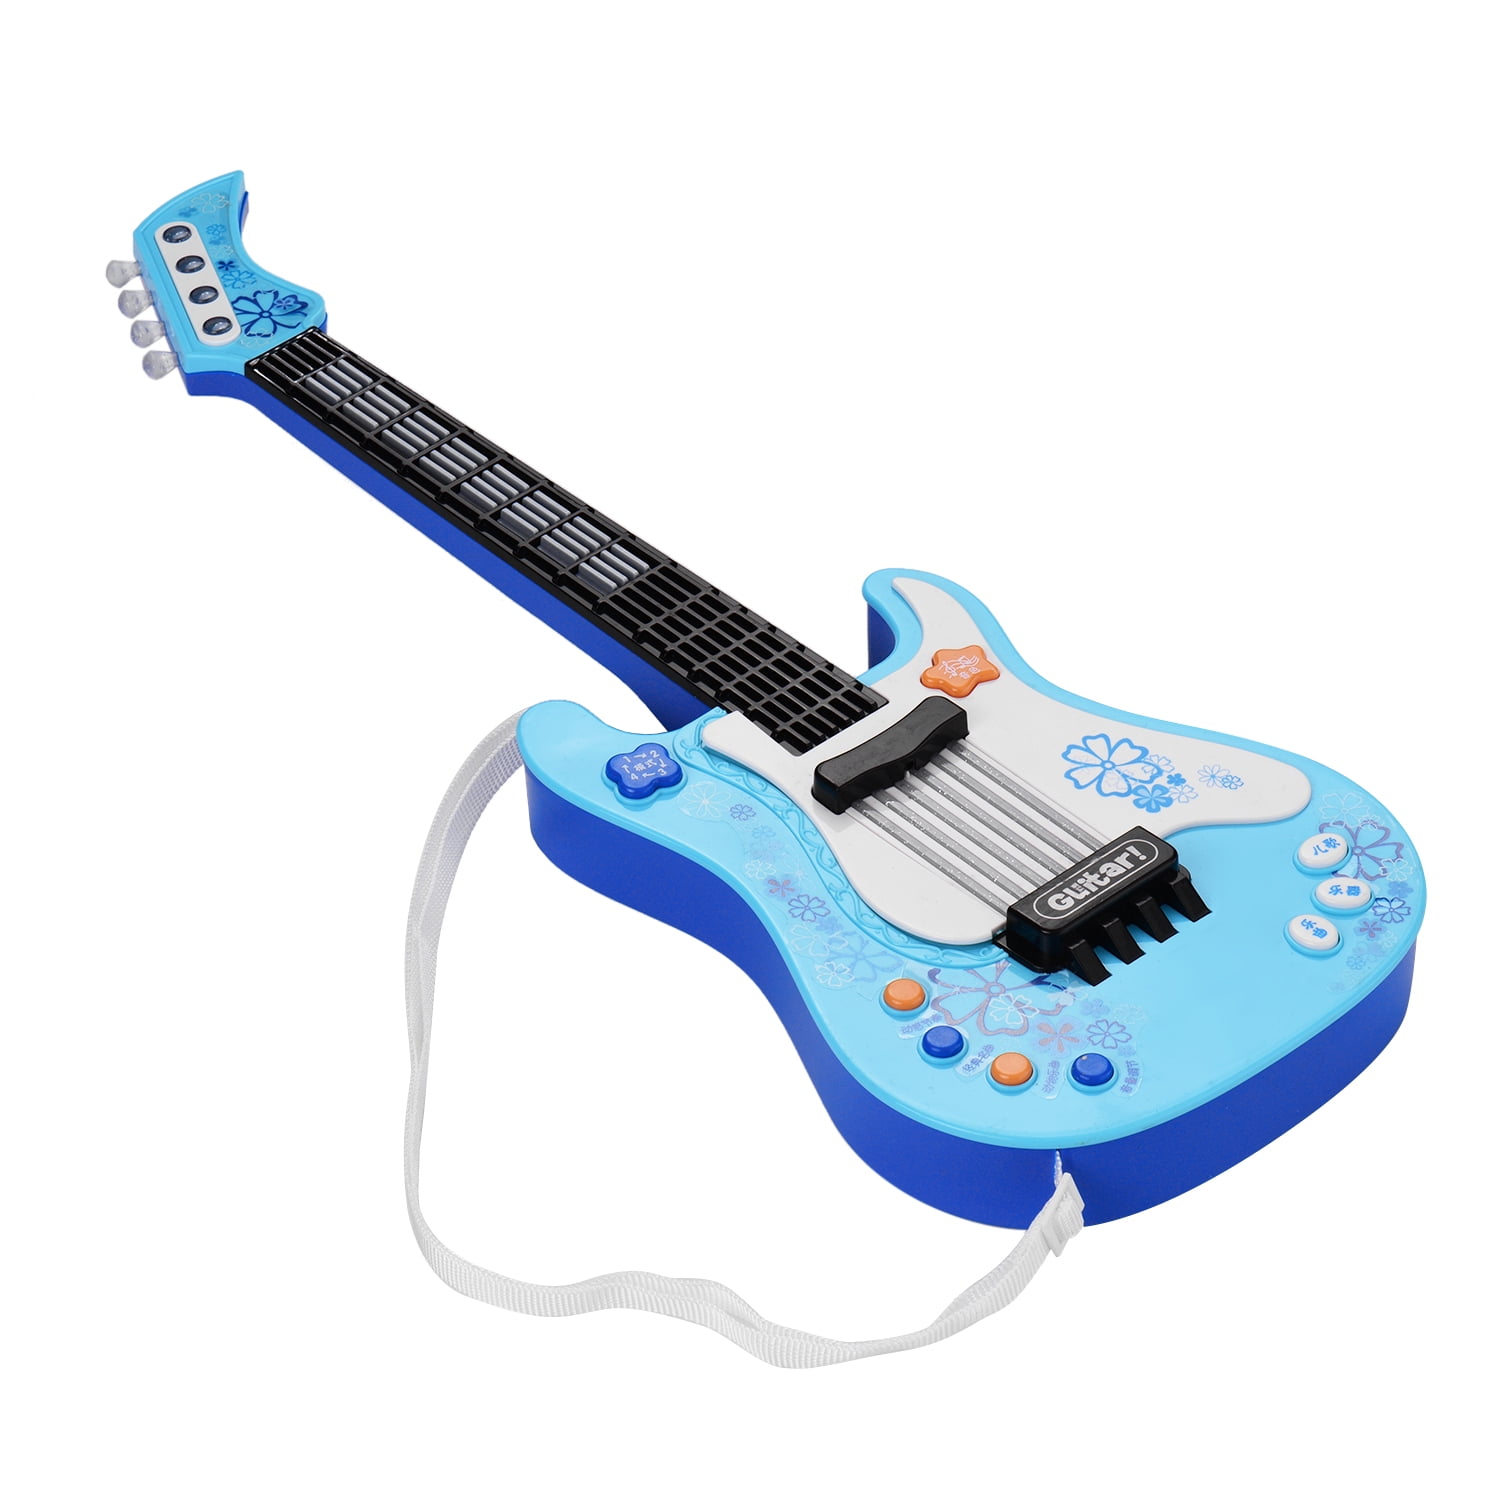 Classic Rock N Roll Guitar Toys Musical Instrument With Sound And Light Kid Gift 